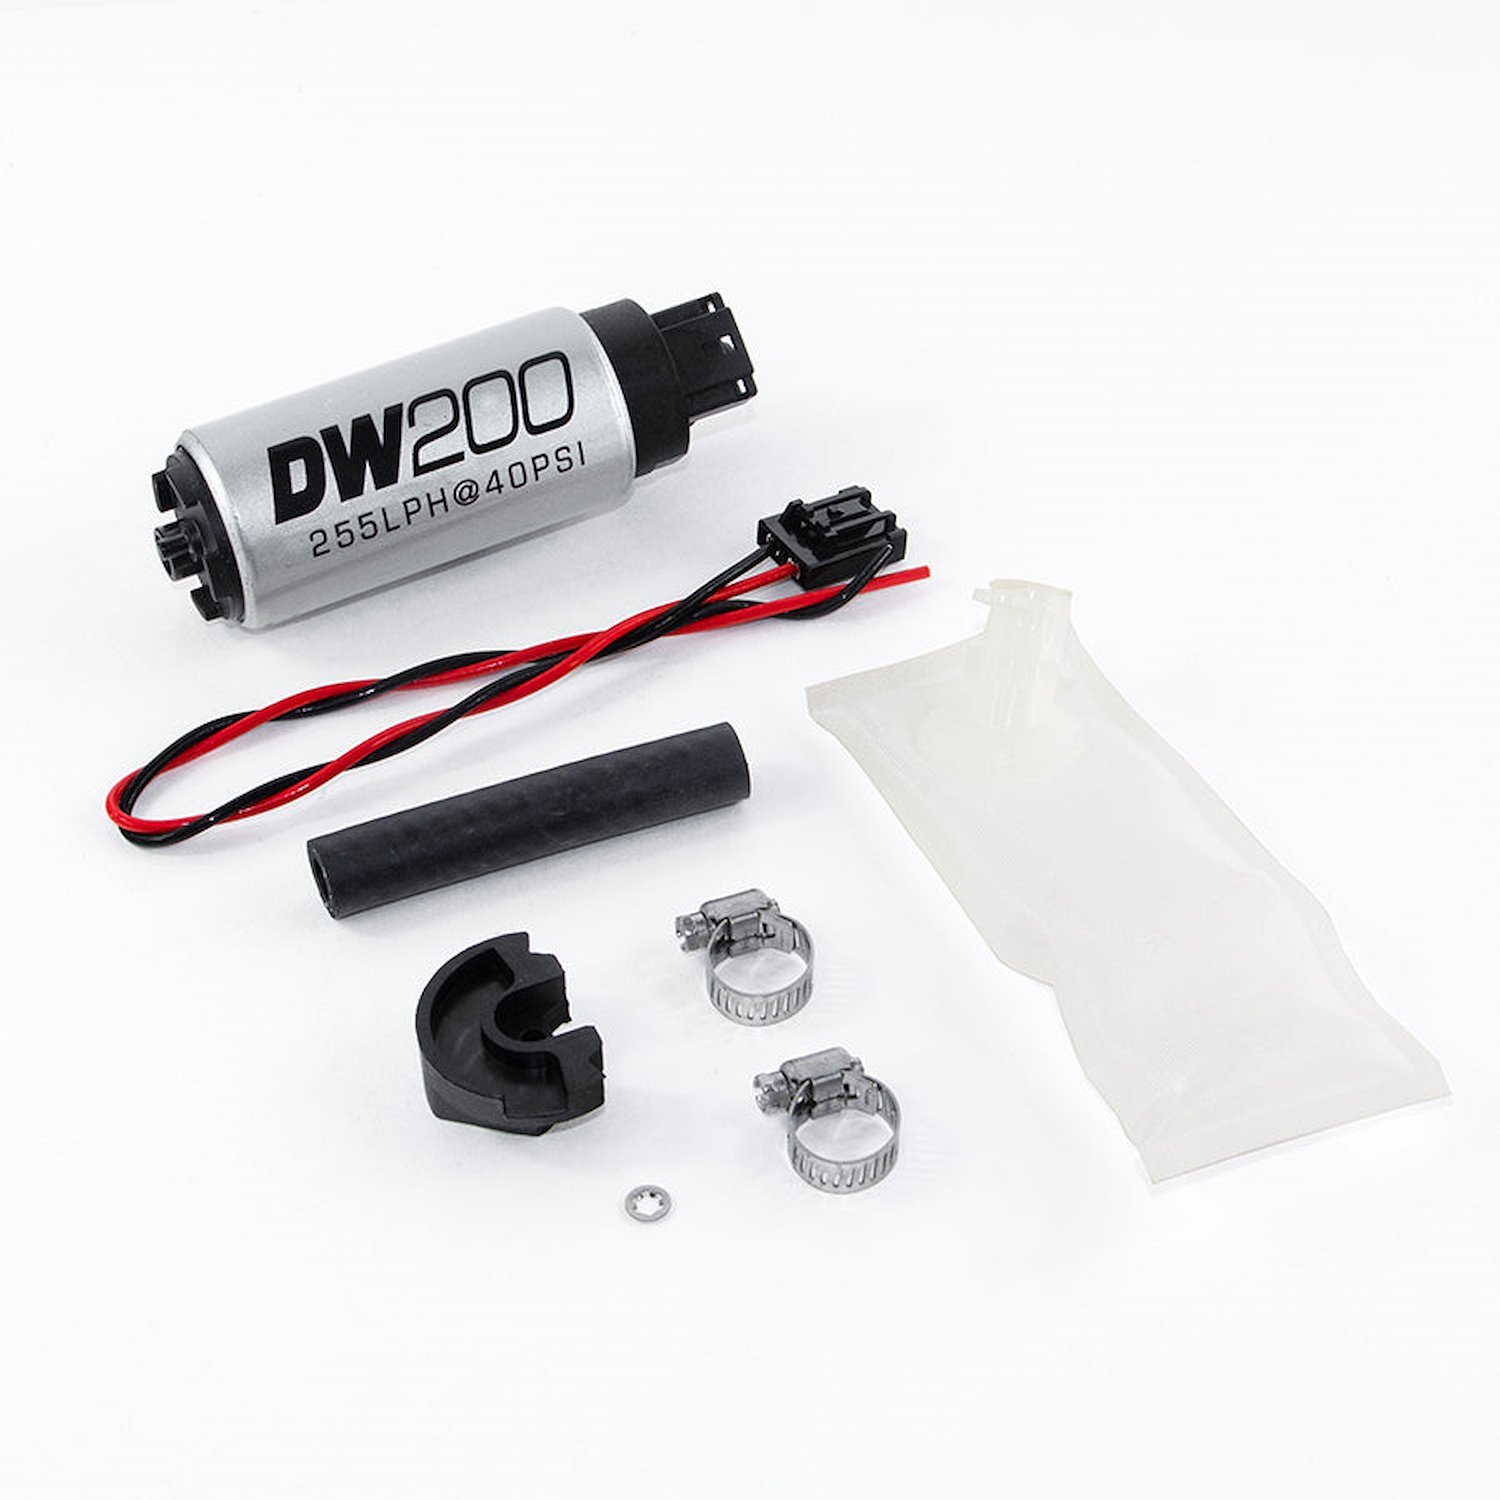 92011024 DW200 Series 255lph In-tank Fuel Pump w/ Install Kit for 93-02 Nissan